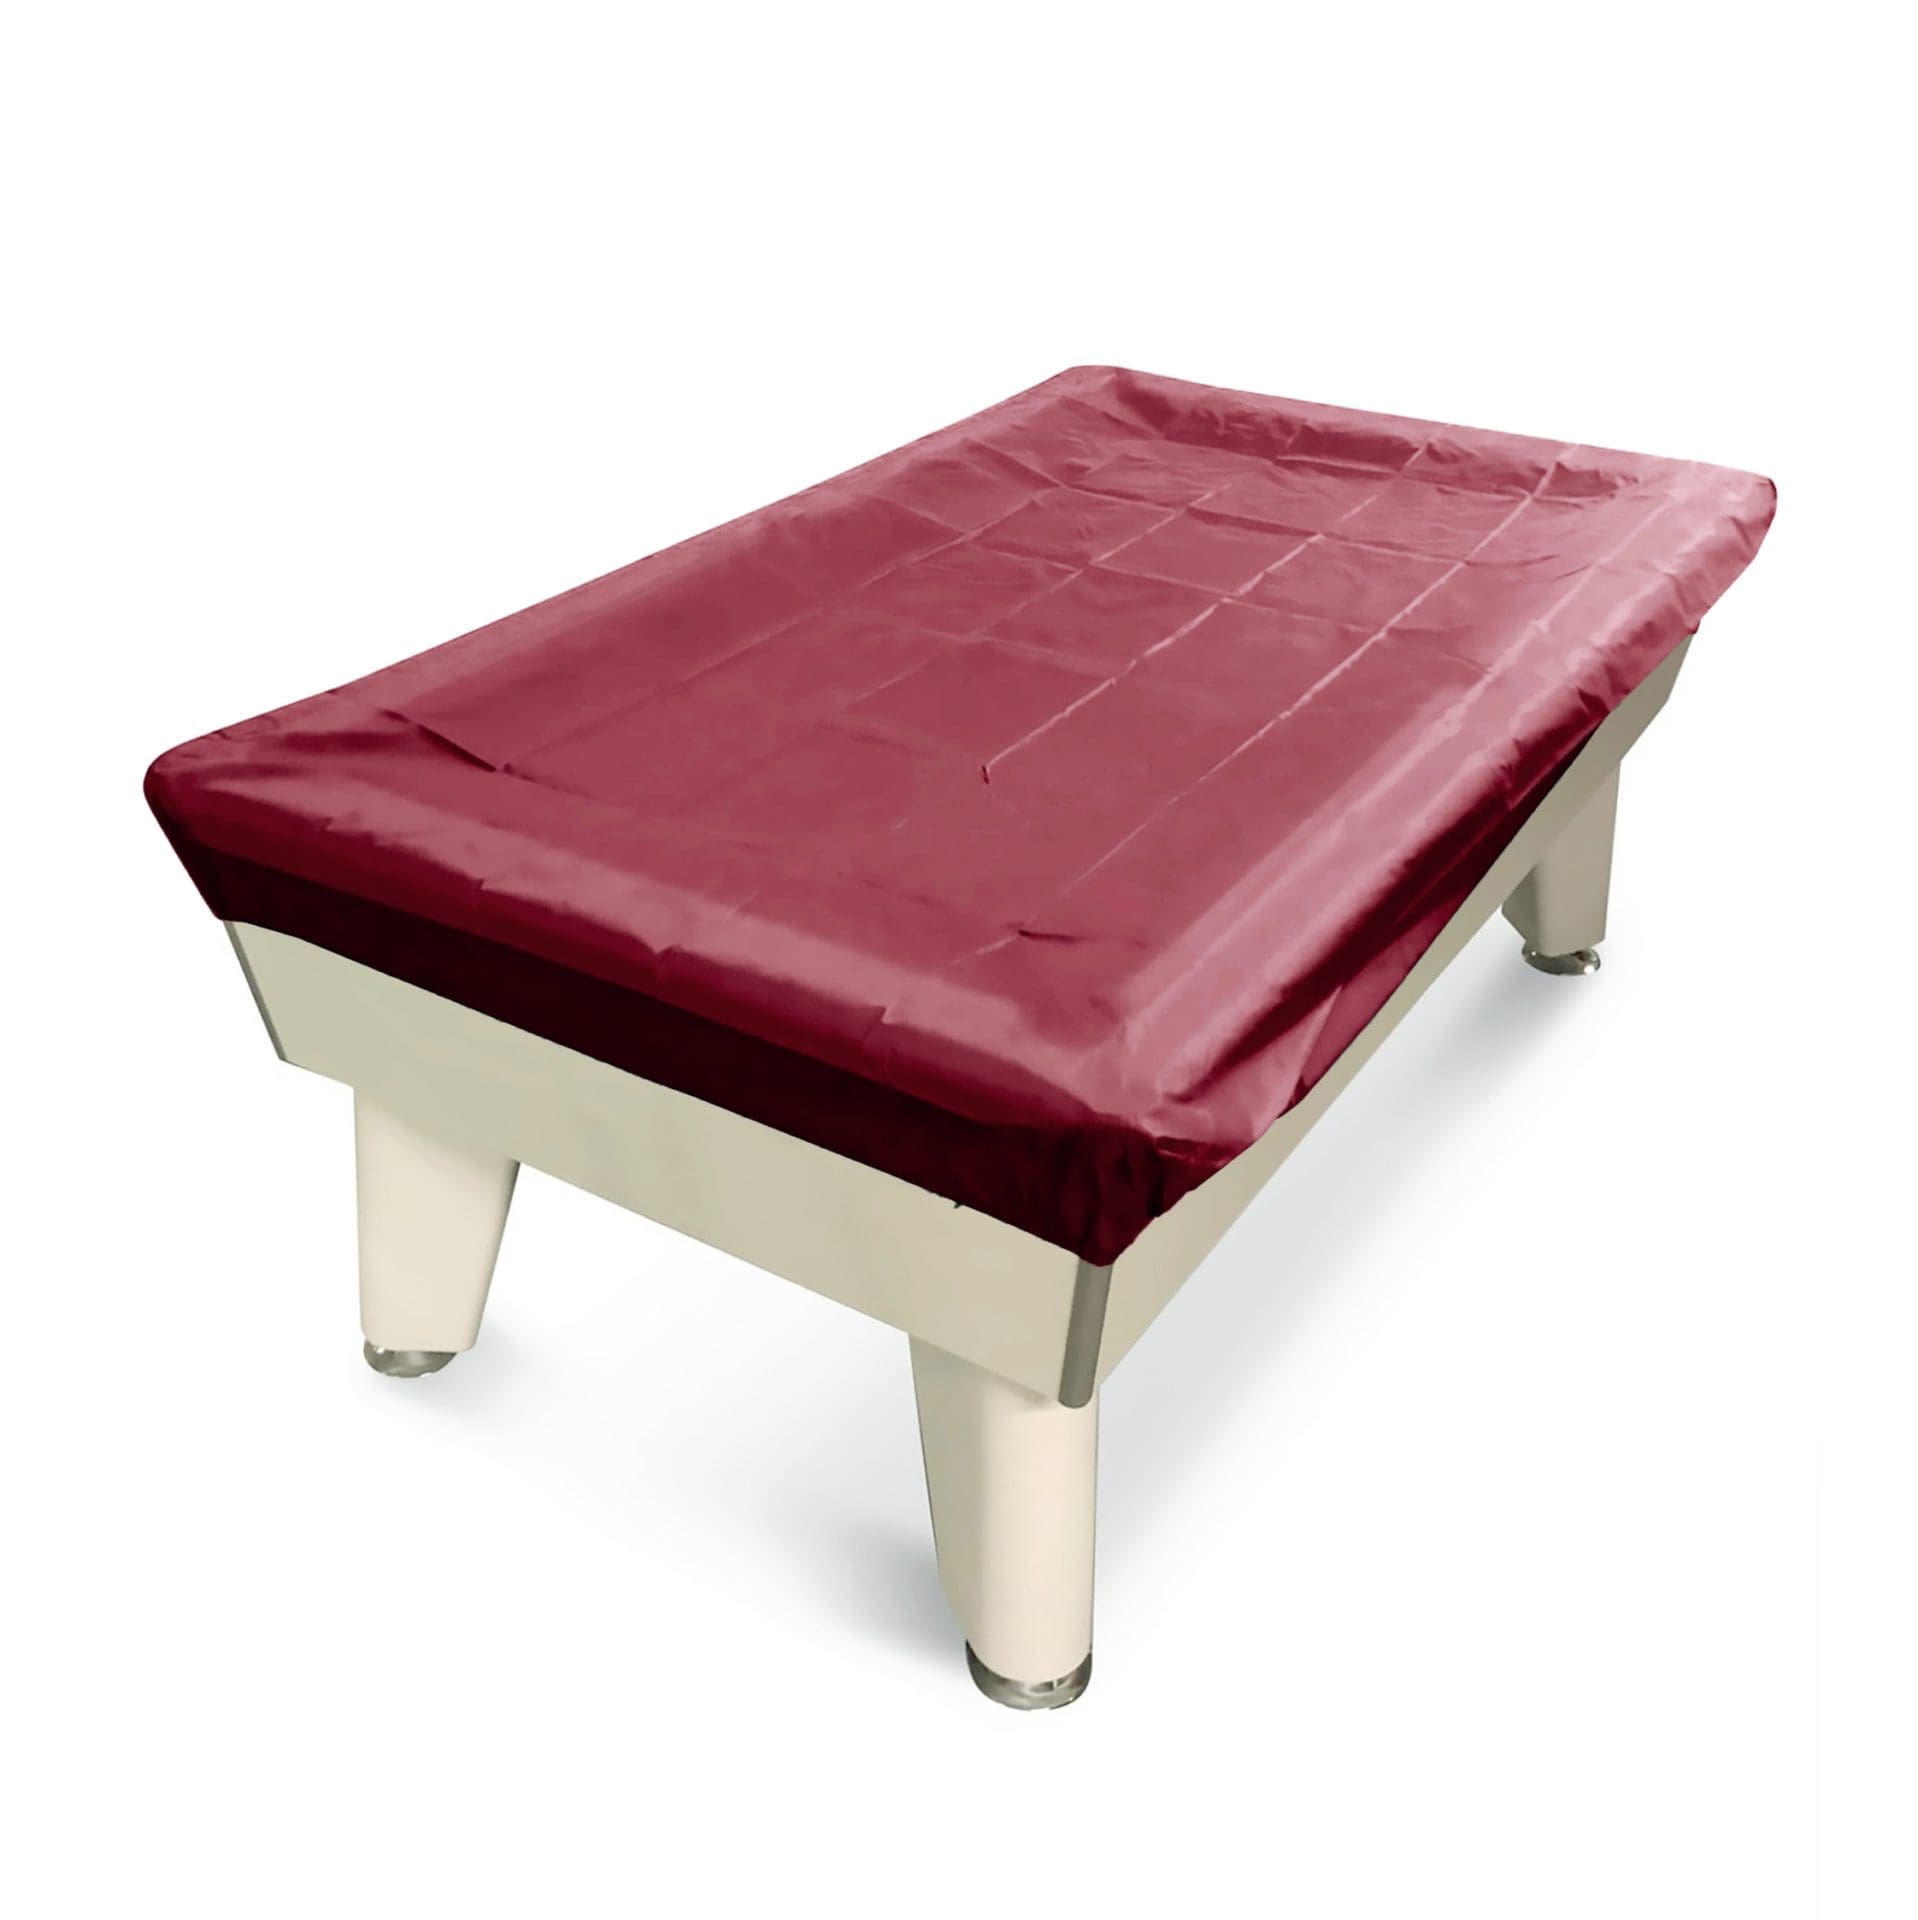 Plain DARK RED 8ft UK Nylon Pool Table Cover with Fitted Elasticated Corners 